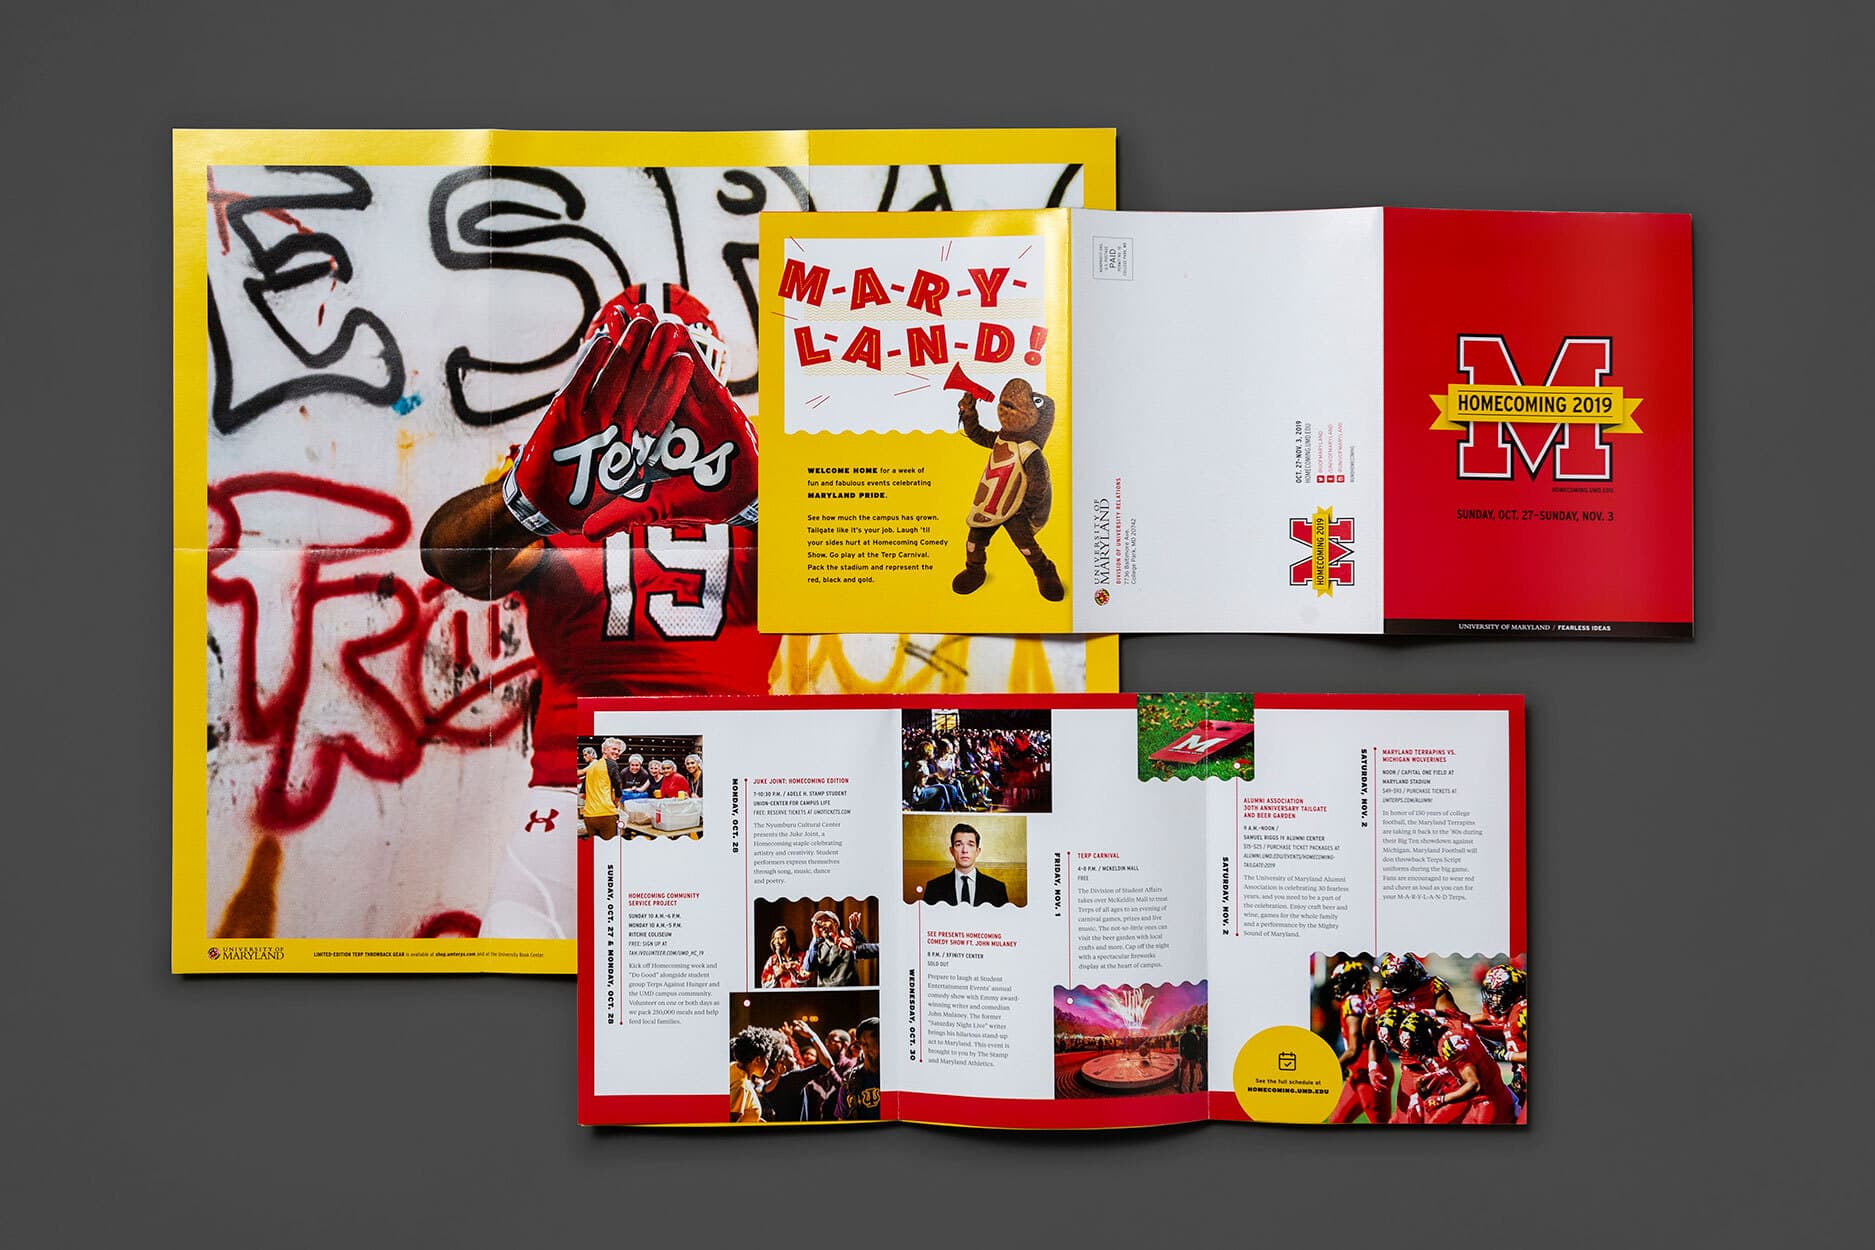 Examples of Maryland Homecoming print materials including the brochure, and a fold-out poster